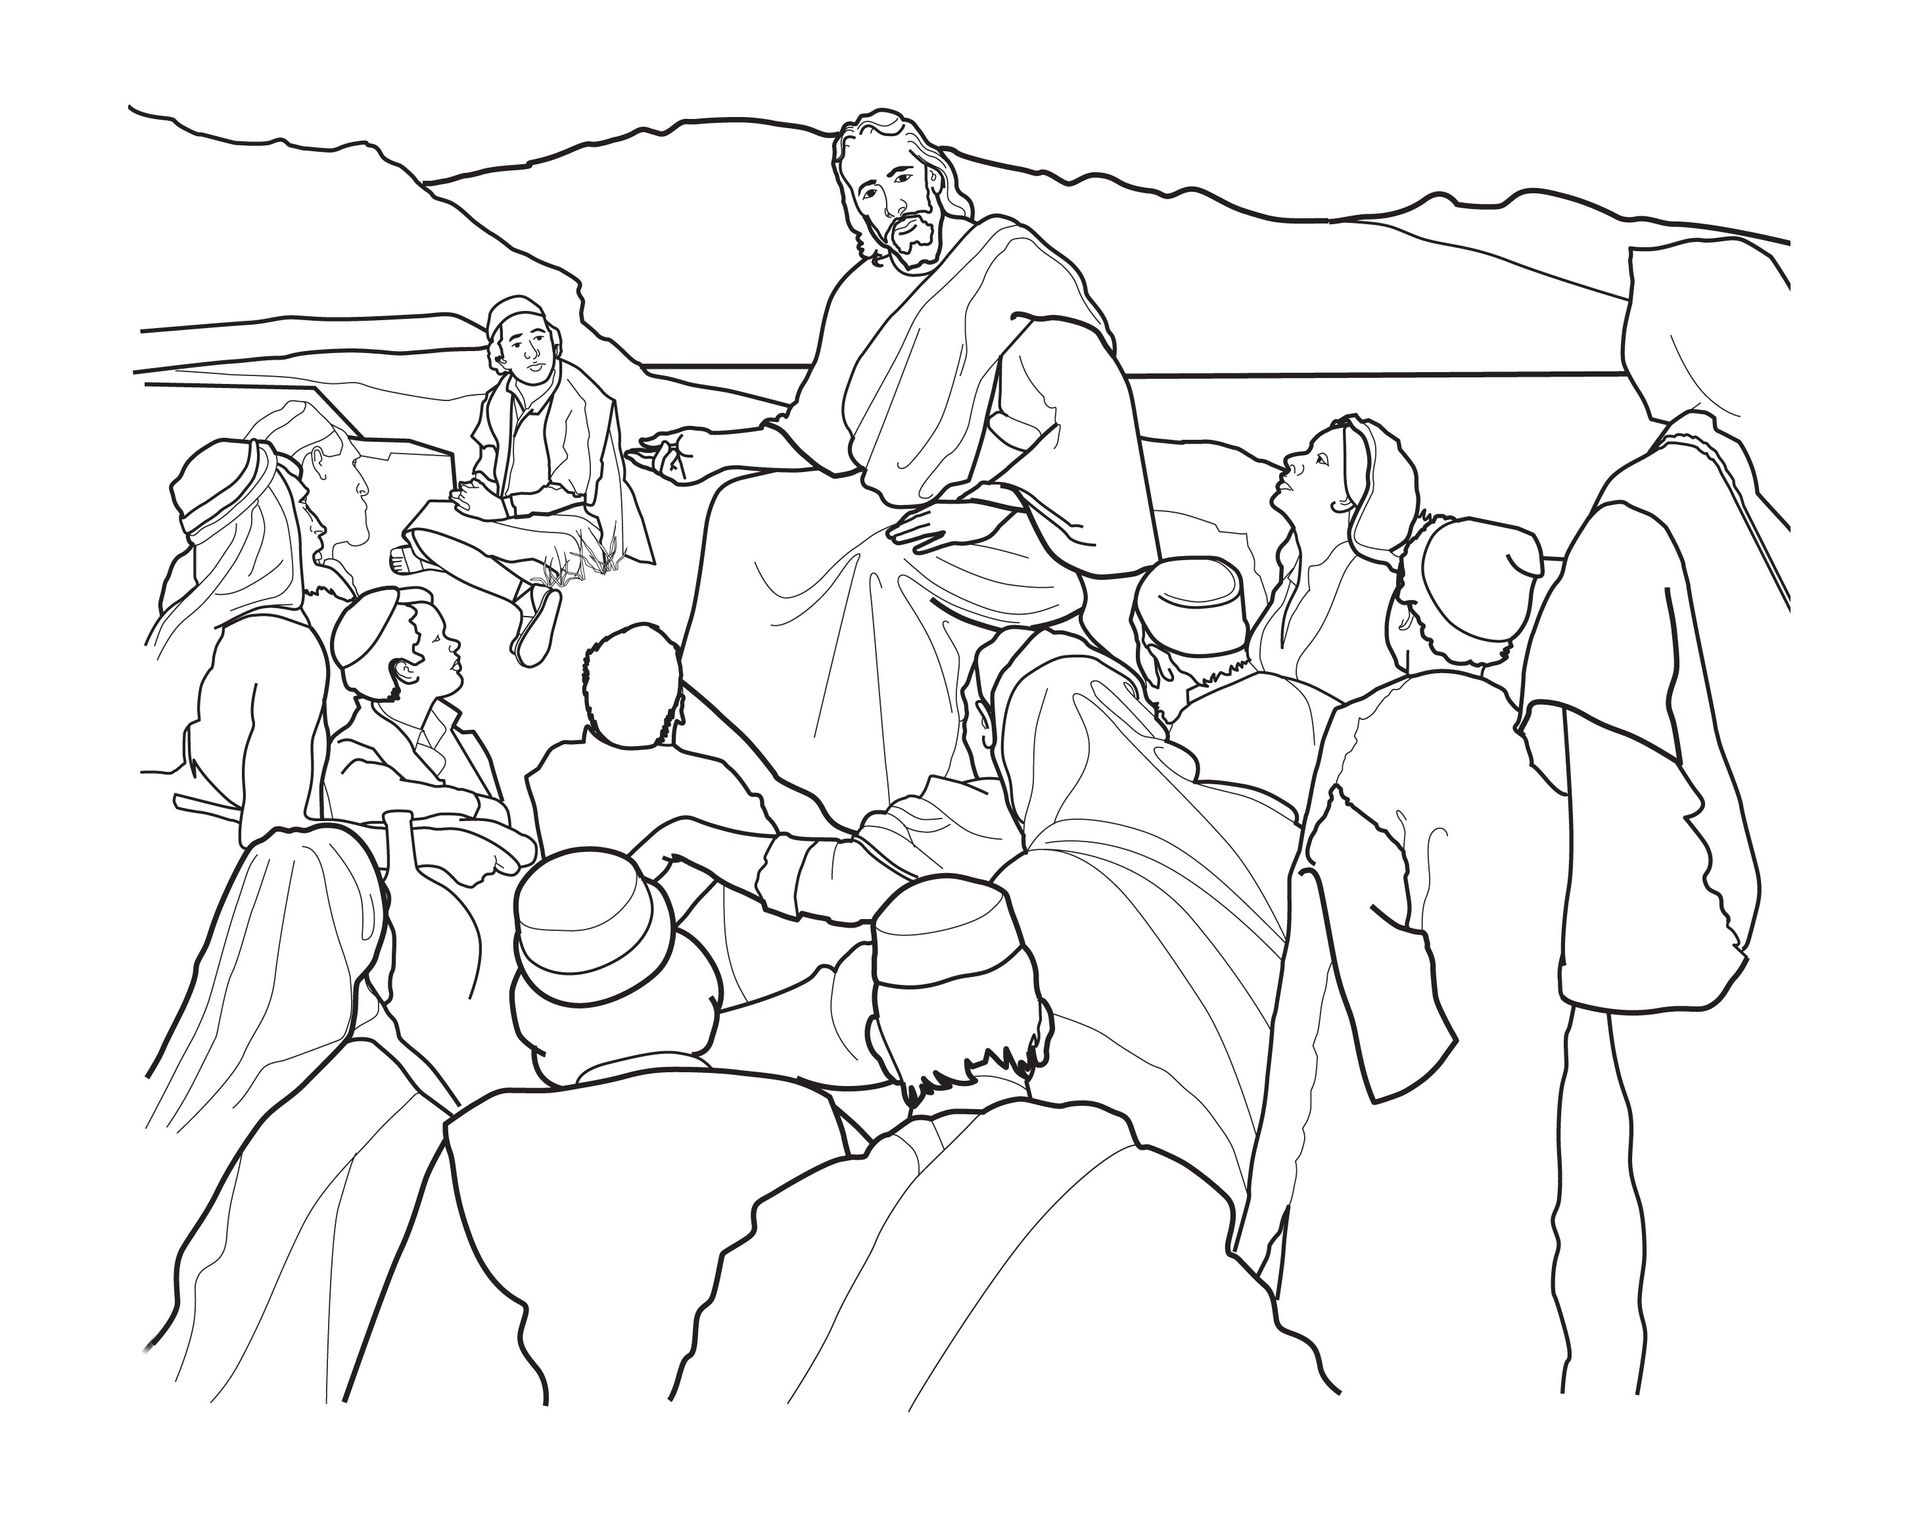 A sketch of the Sermon on the Mount, based on the painting by Harry Anderson.